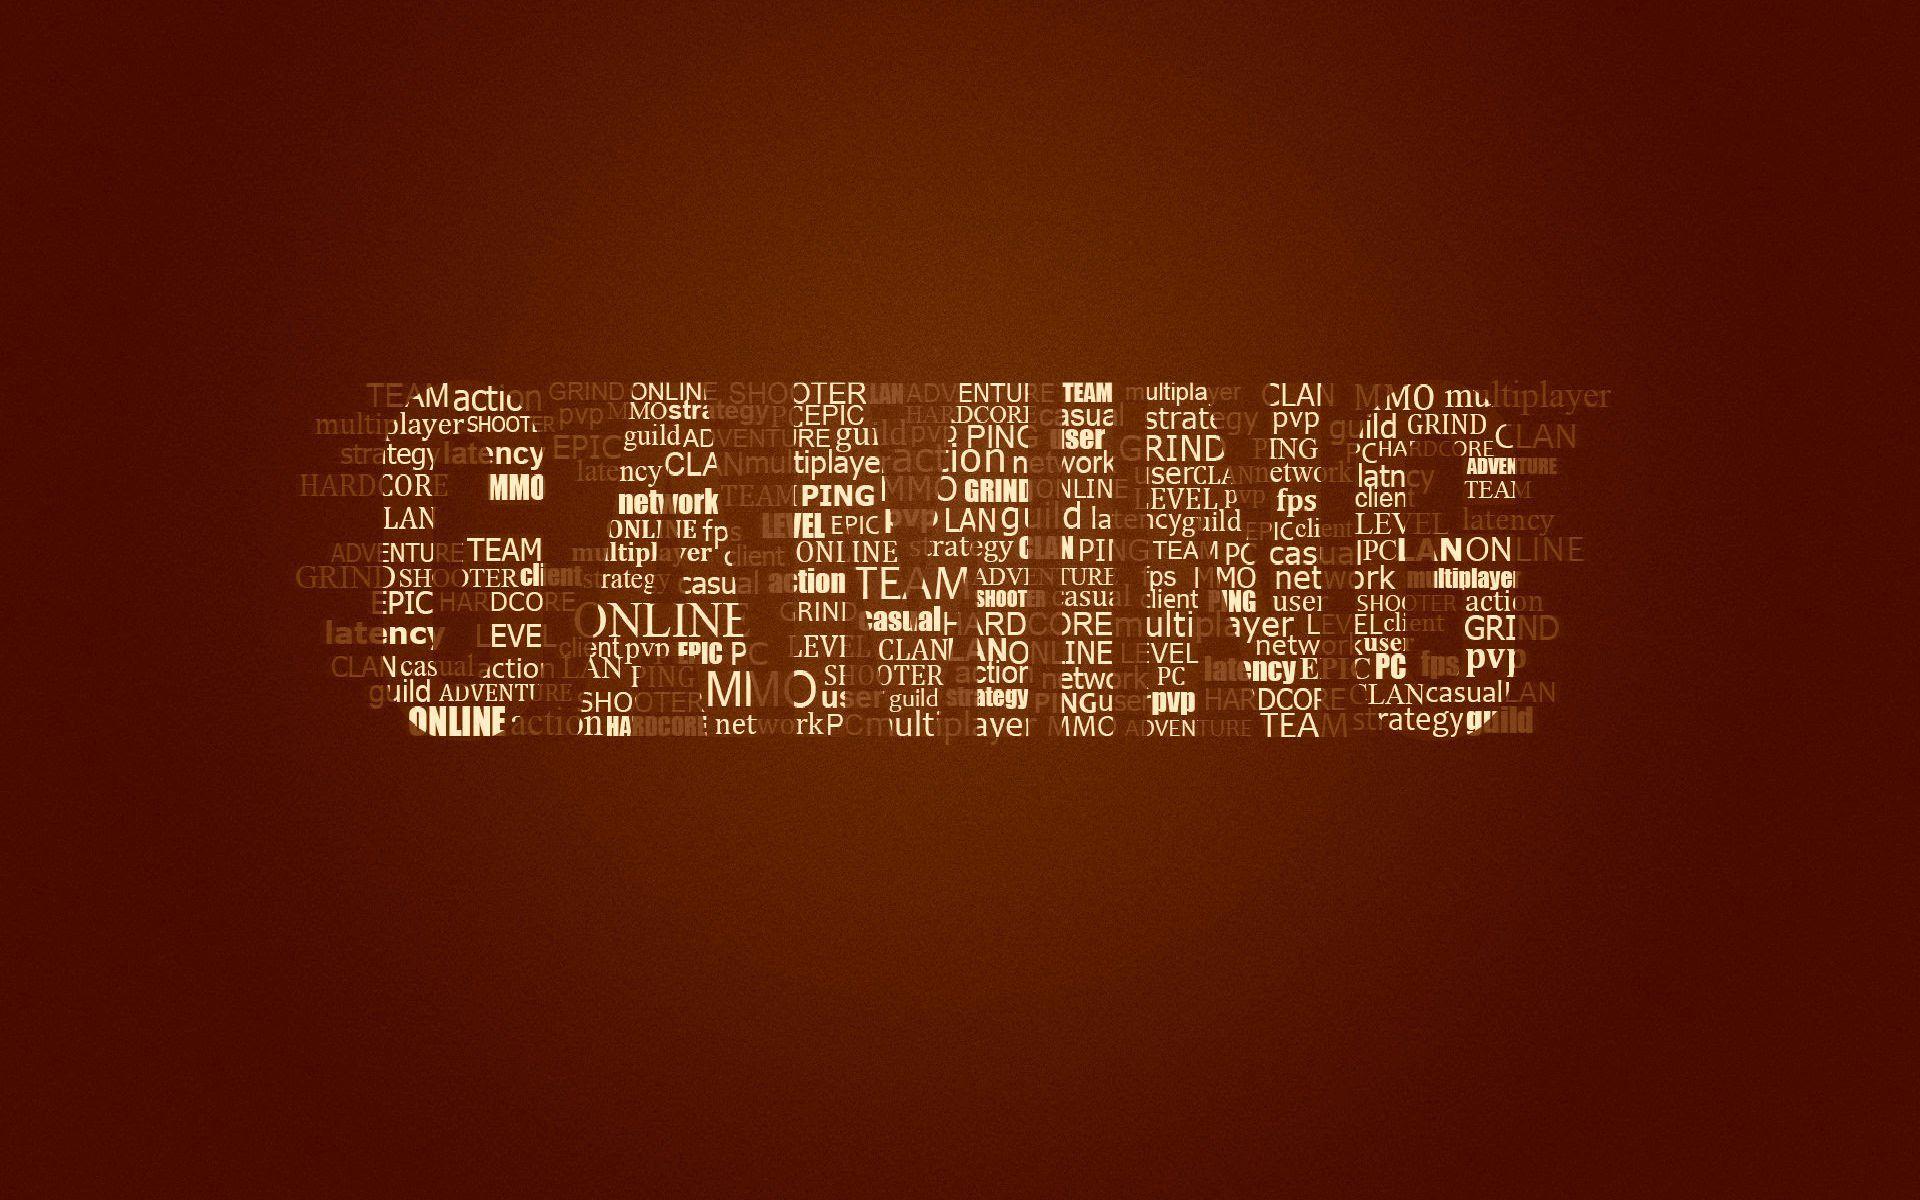 game, letters, computer, quotes wallpaper hd, quote about life, video